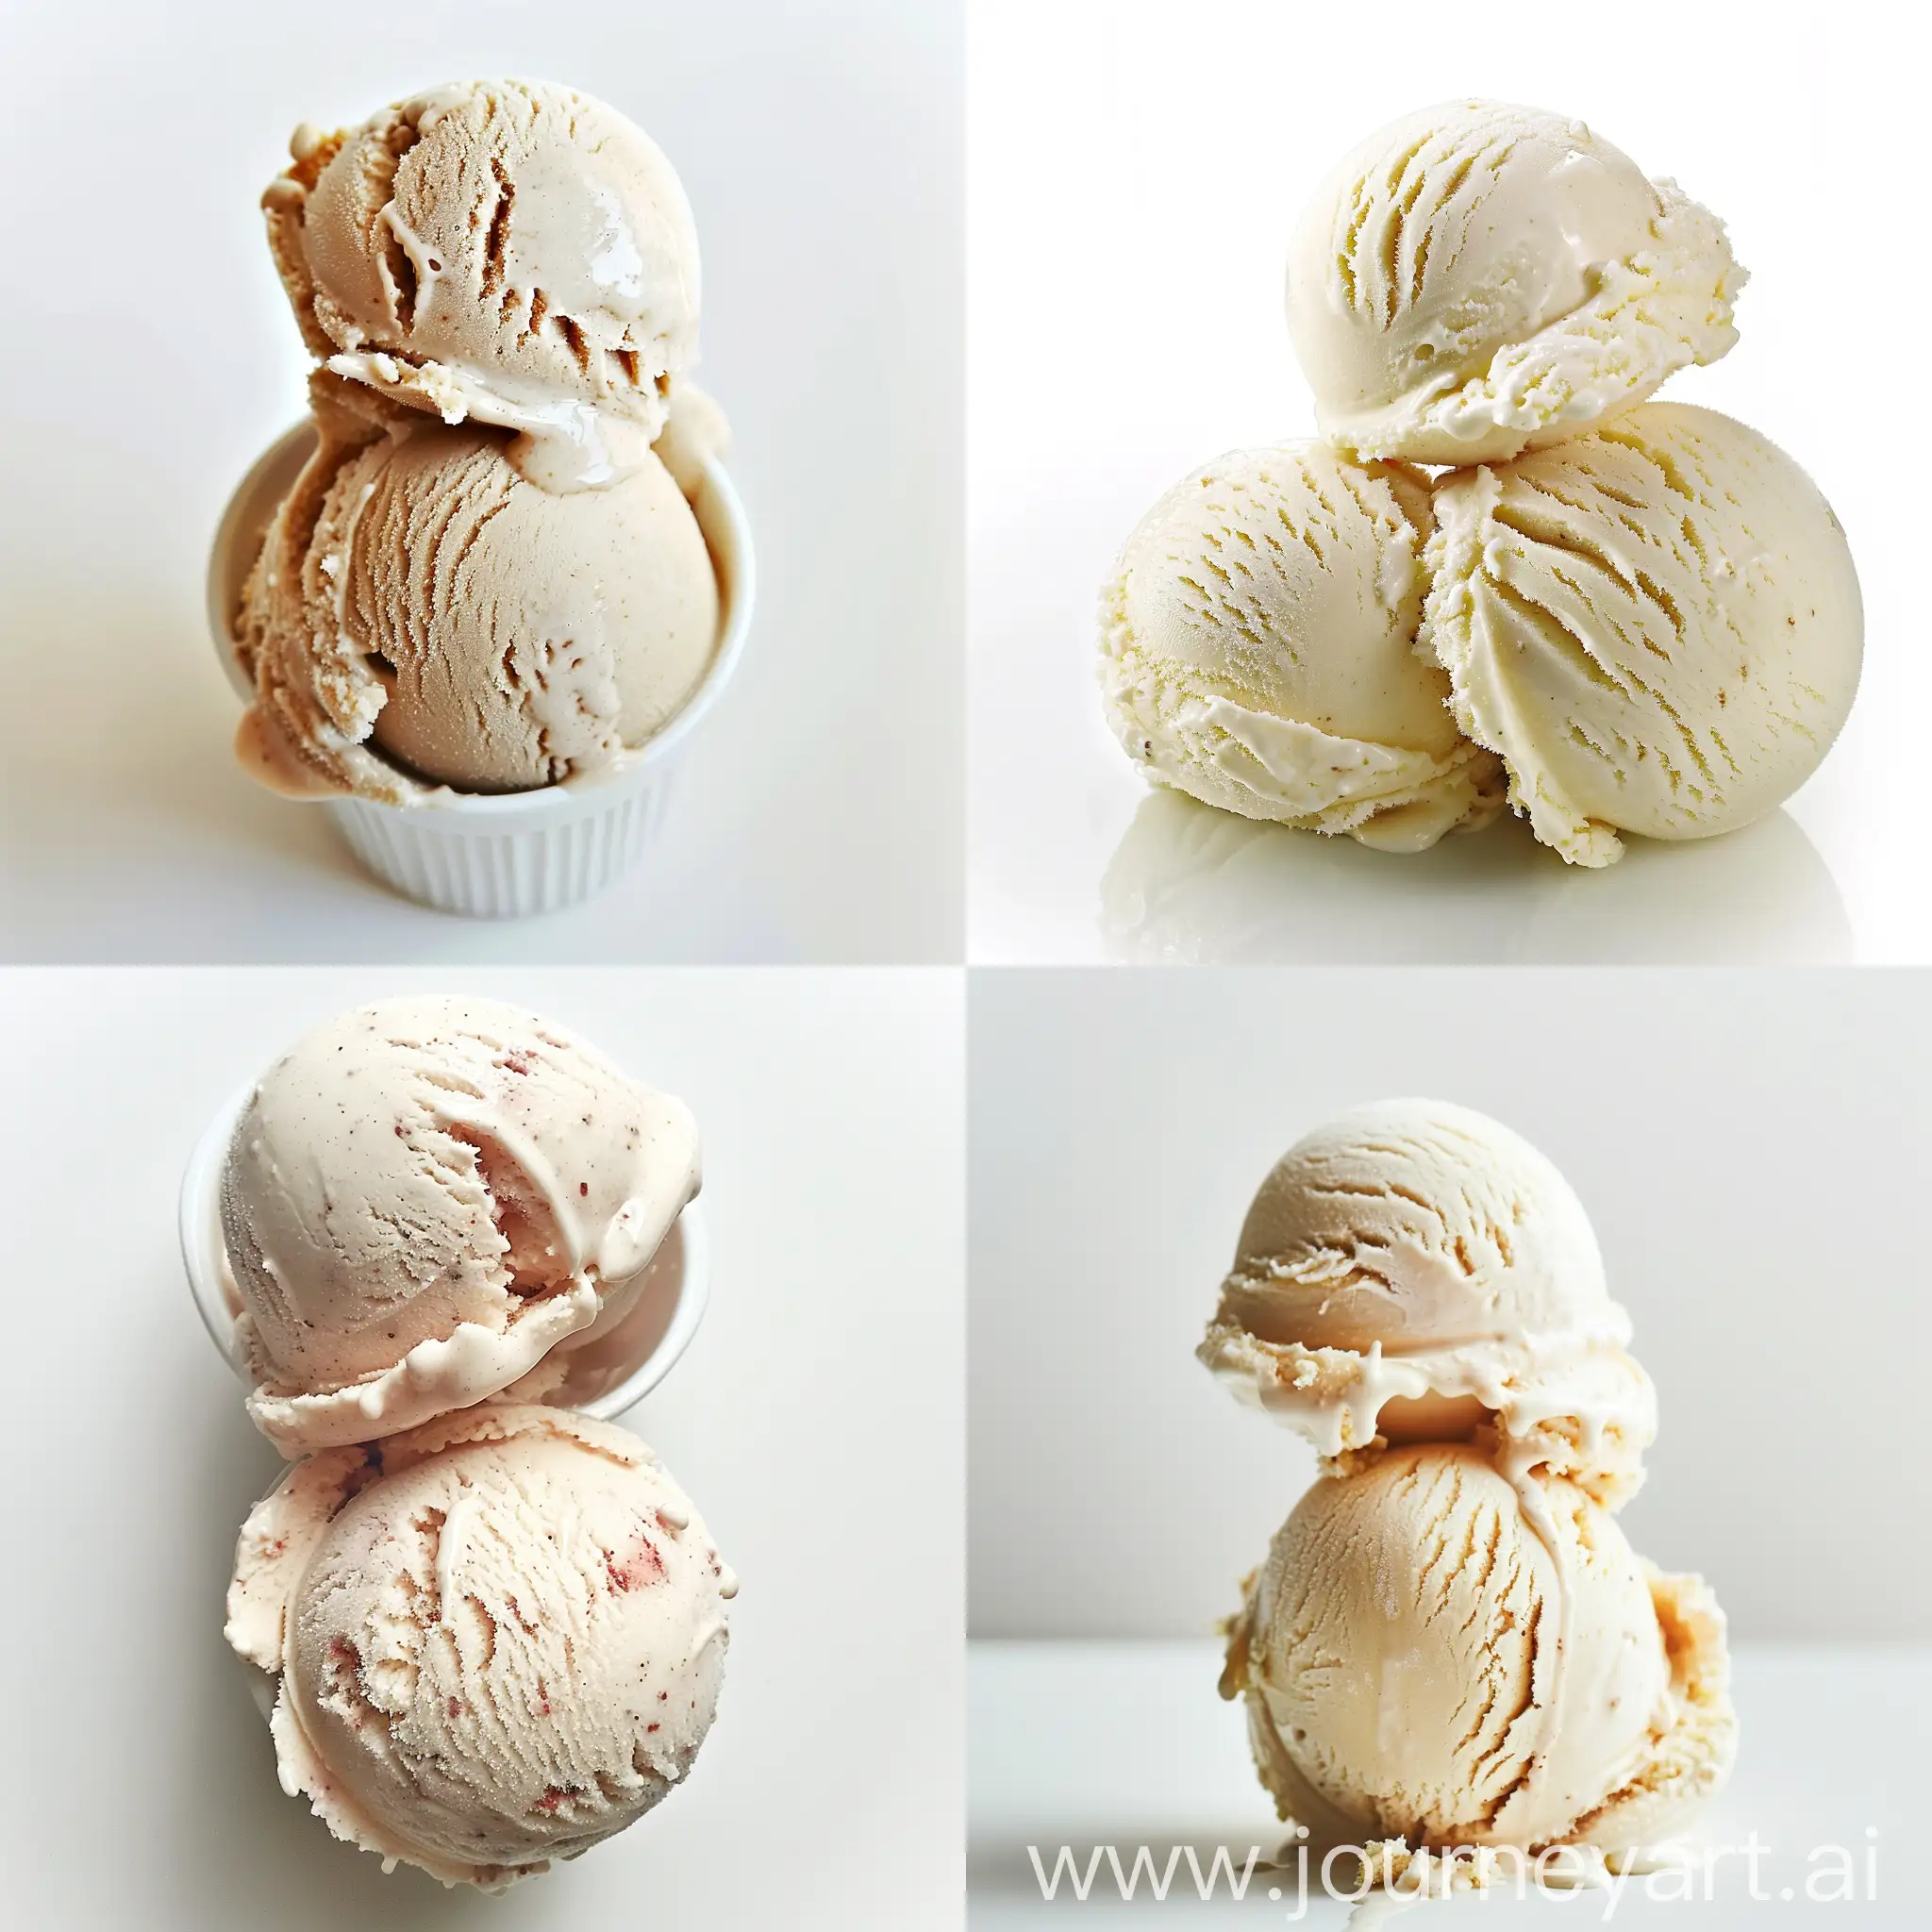 Two-Scoops-of-Ice-Cream-on-White-Background